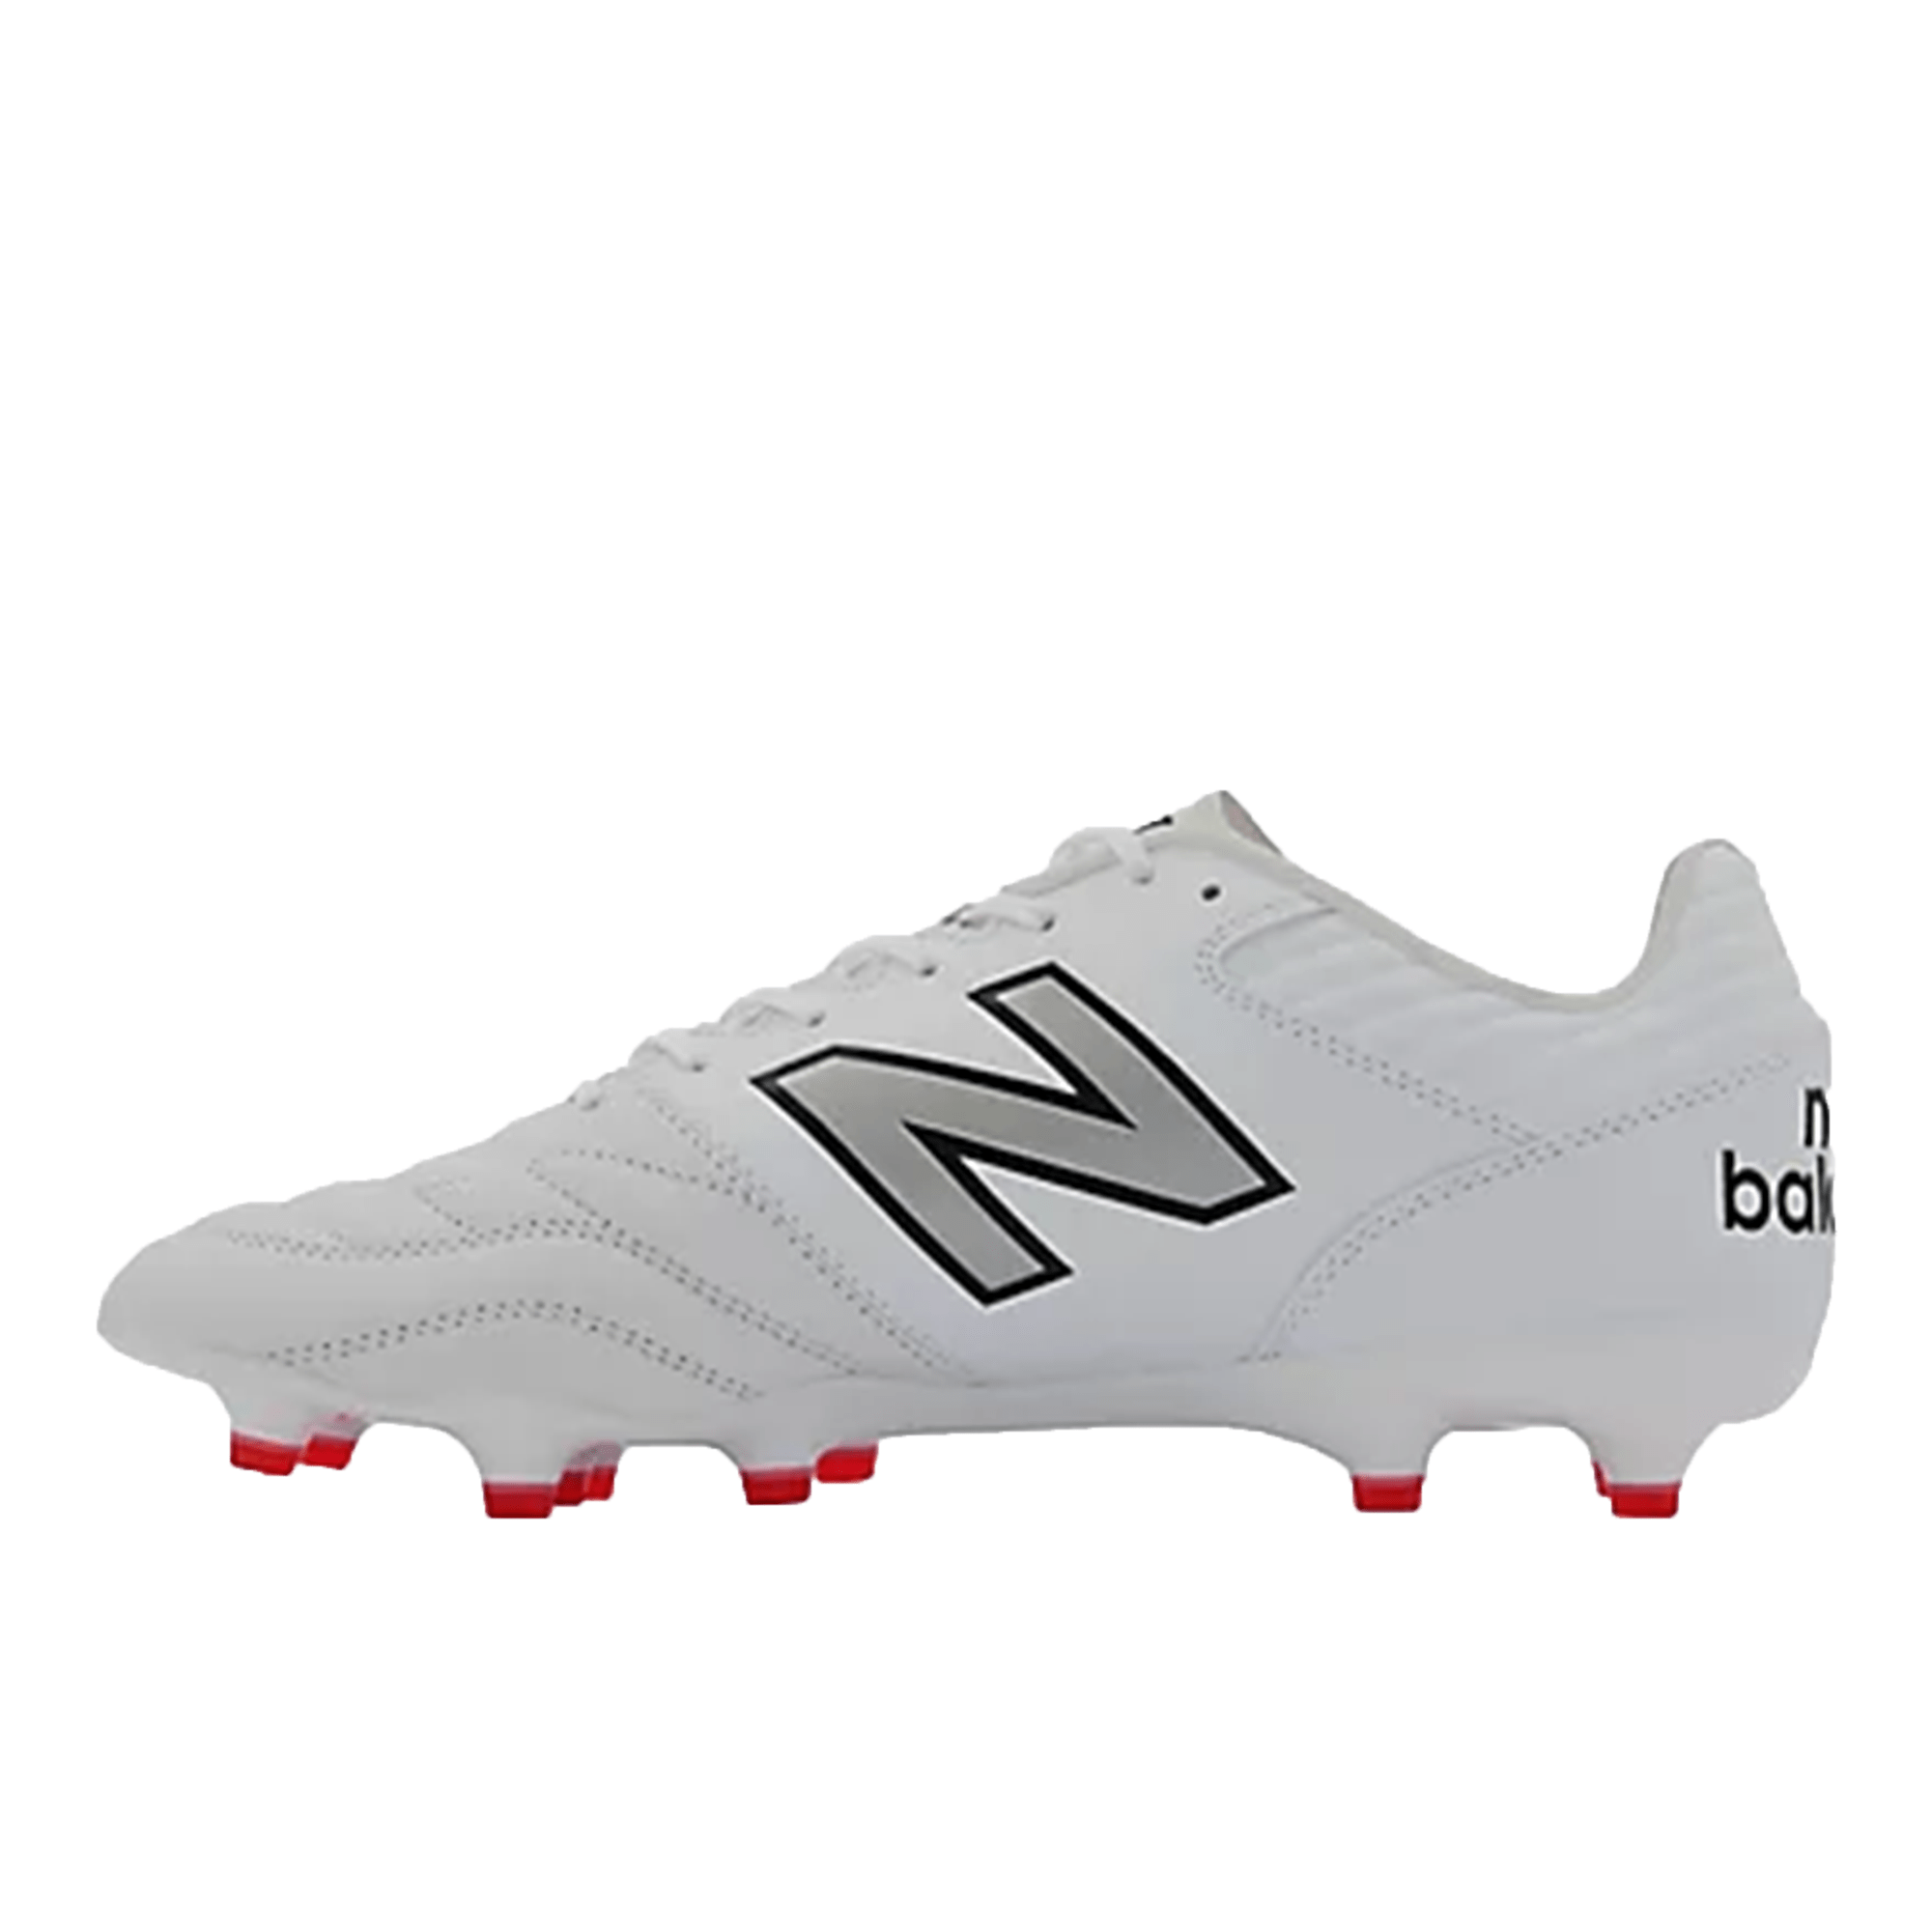 New Balance 442 V2 Pro Wide Rugby Cleat - Firm Ground Boots - White/Silver  - SKU MS41FWT2-2E / World Rugby Shop